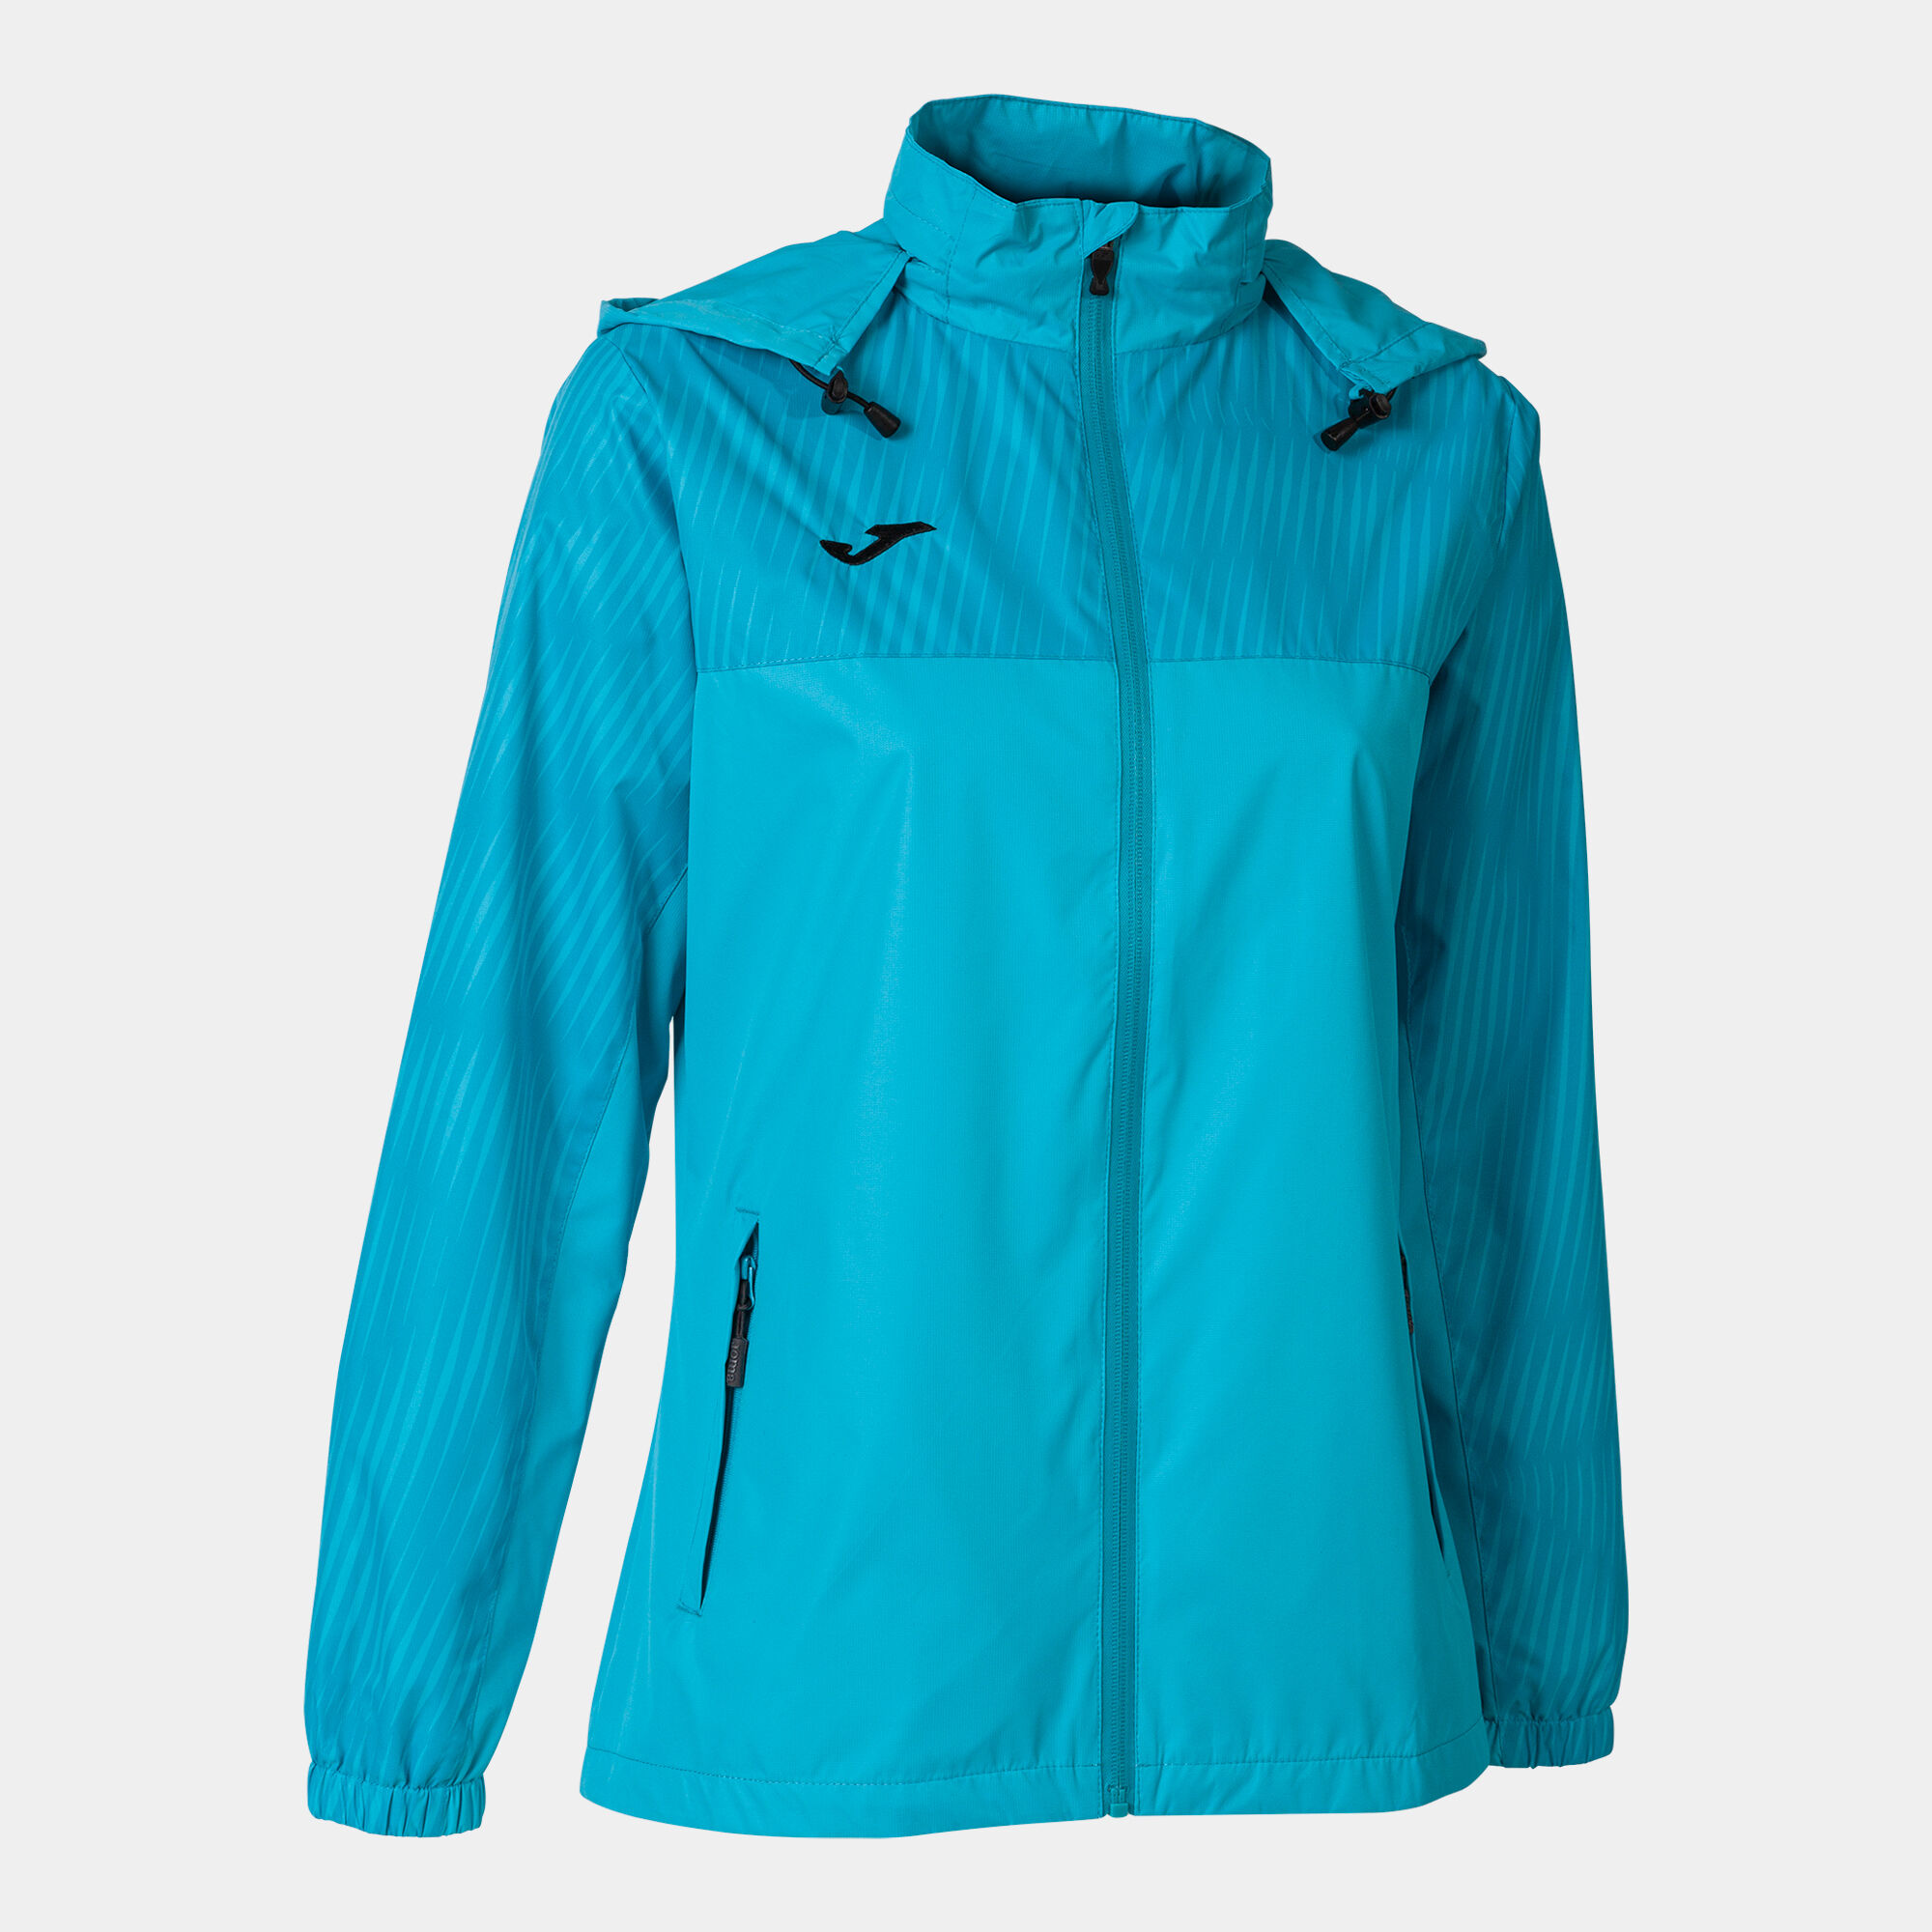 IMPERMÉABLE FEMME MONTREAL TURQUOISE FLUO